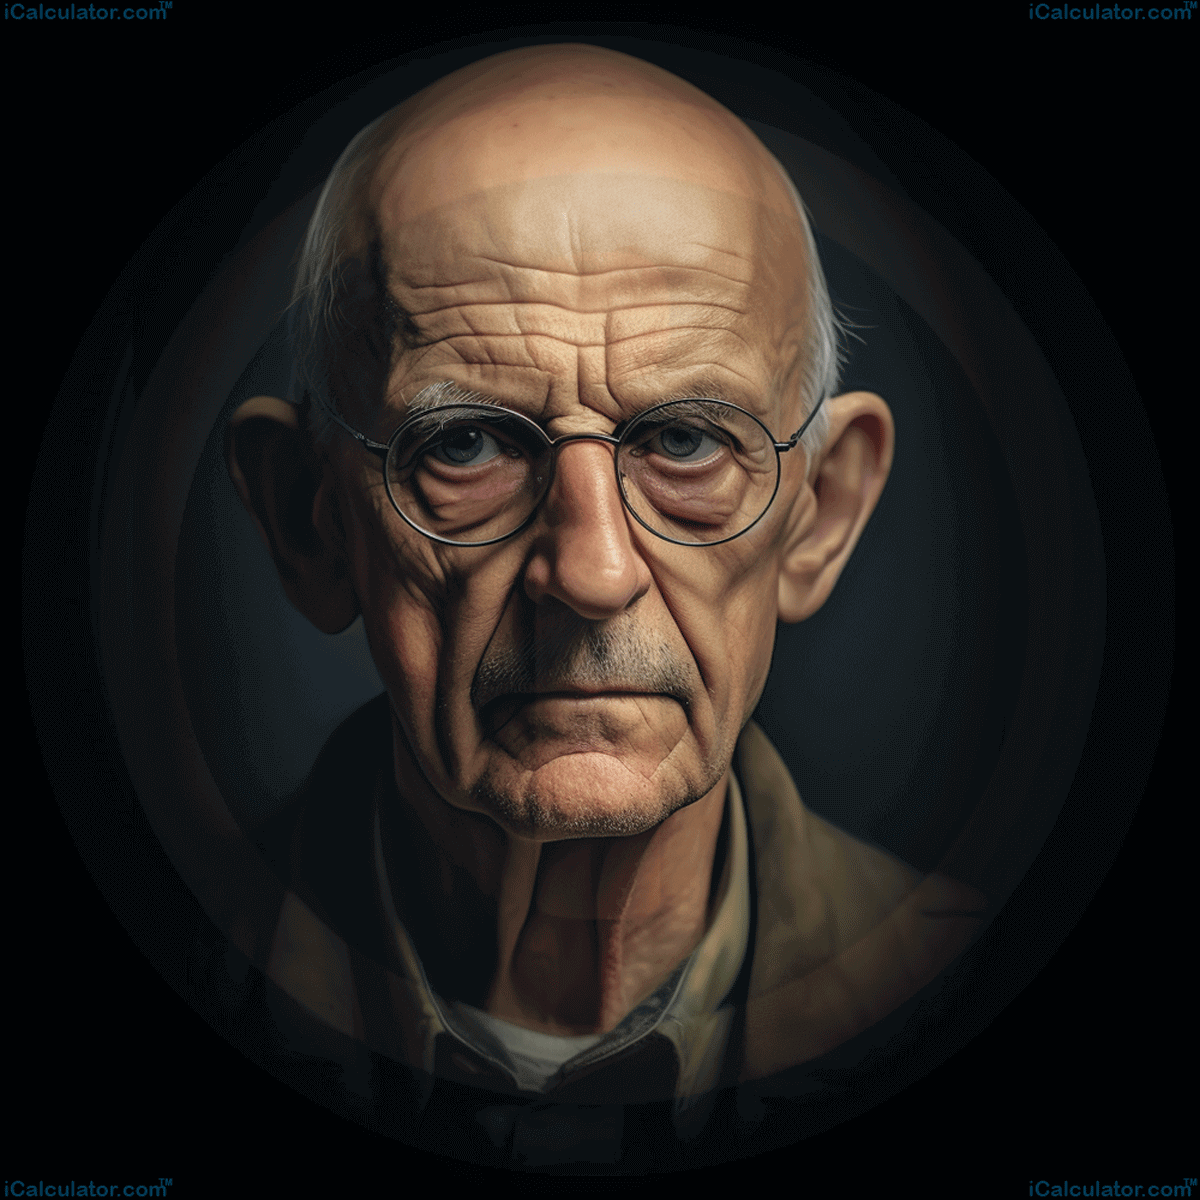 This image shows the physists Max Planck, a renowned scientist who advanced the world of phyics. Max Planck Biography